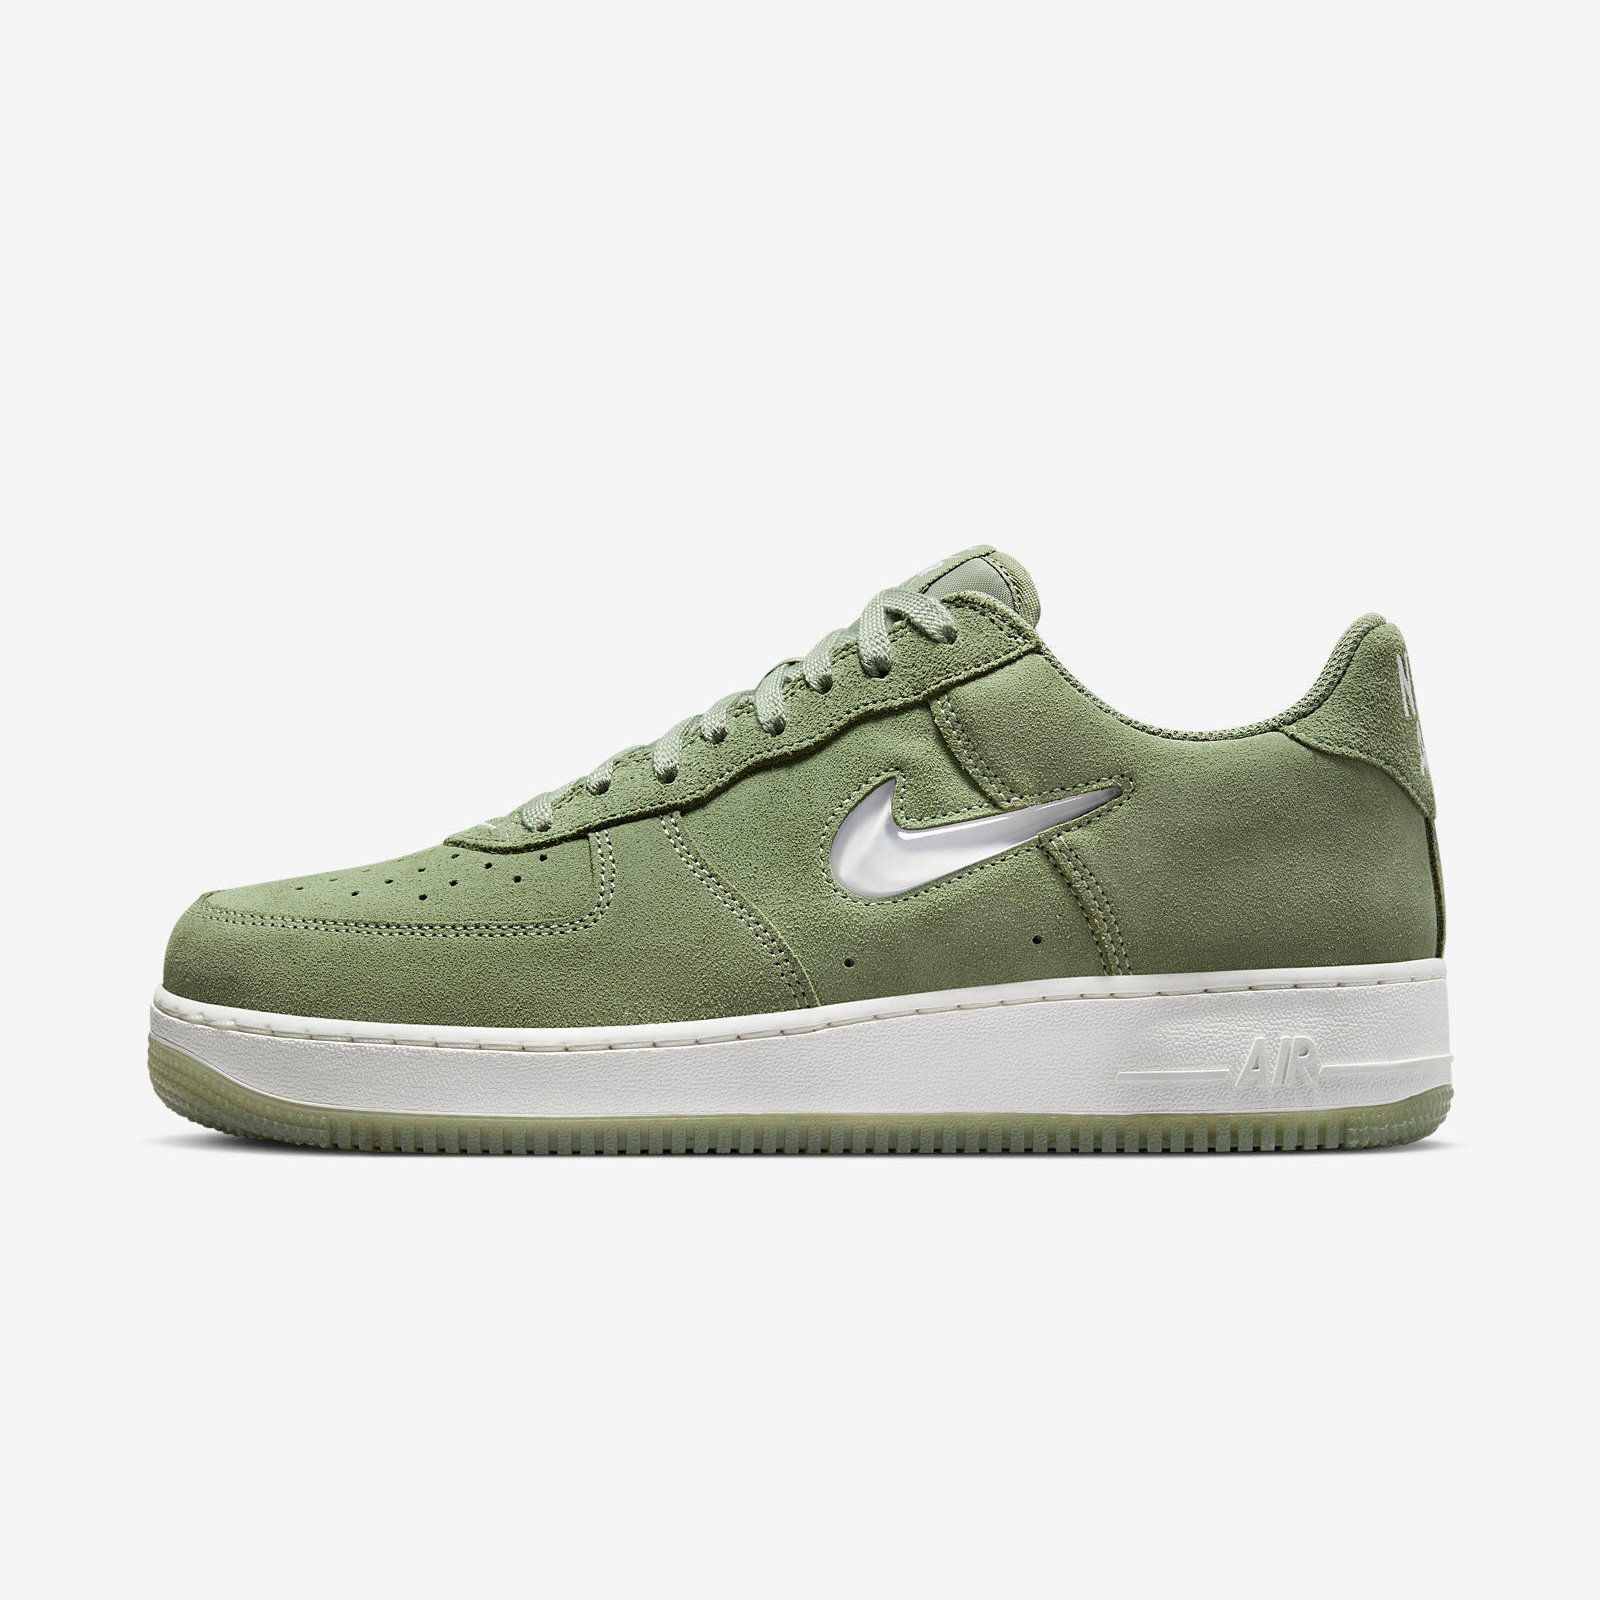 Nike Air Force 1
« Color of the Month »